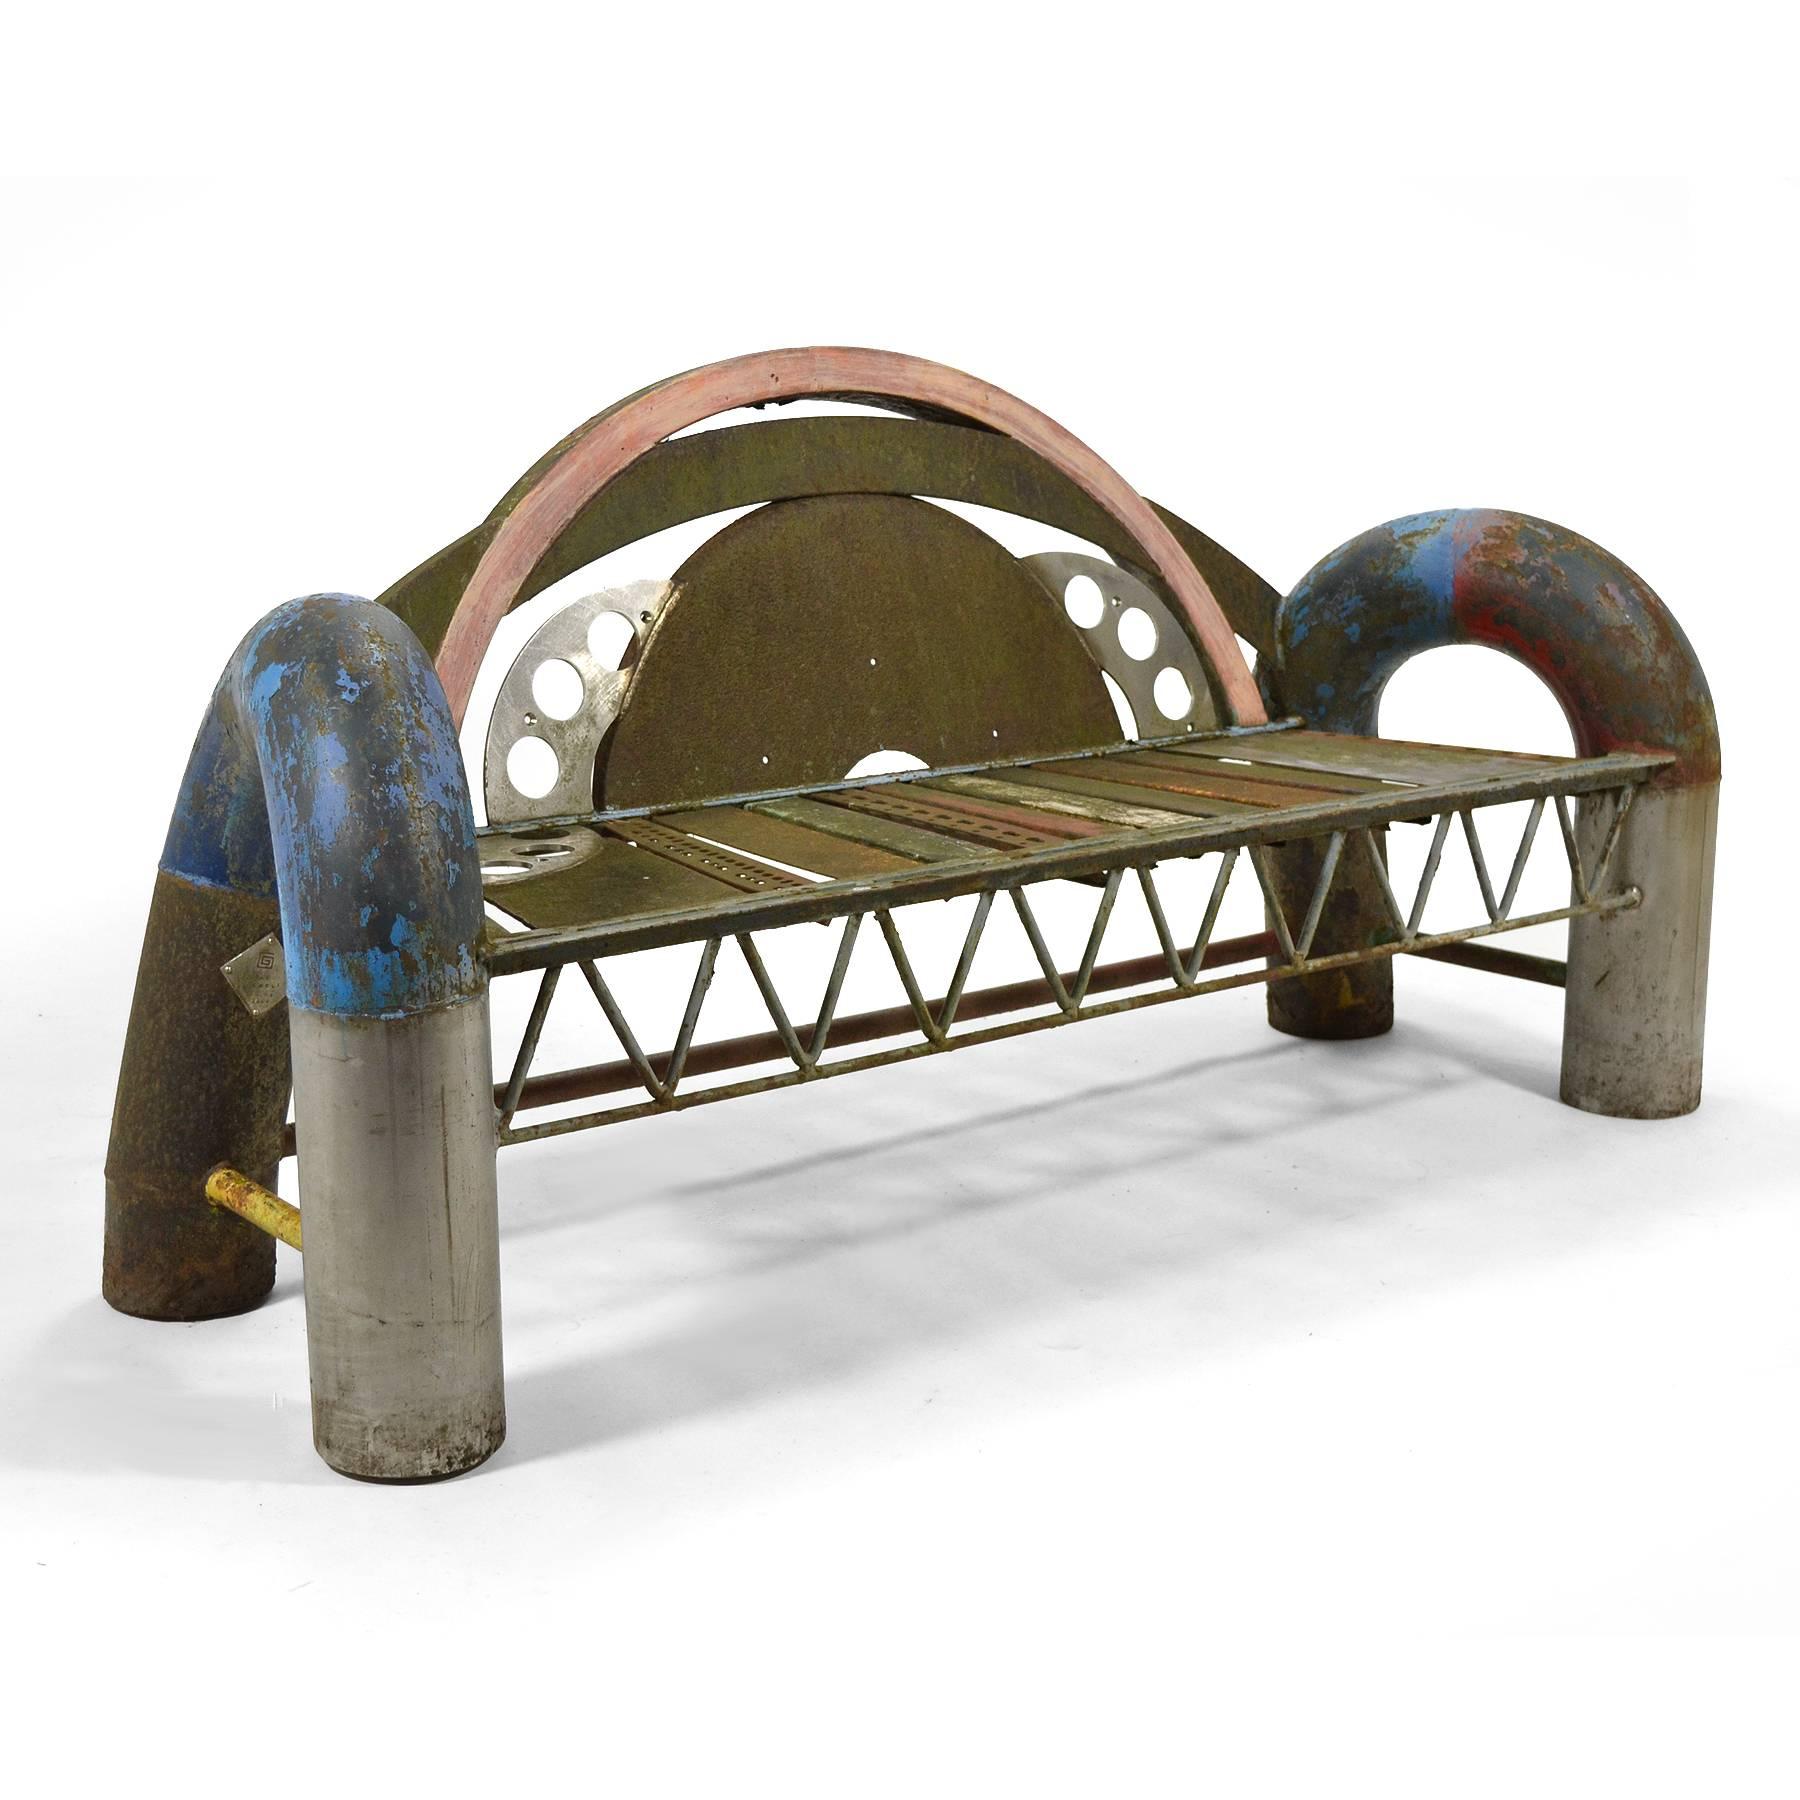 Georgia-based sculptor Gordon Chandler created a series of large benches in the 1990s using reclaimed metal. They were intended to be used either indoors or out. This beautiful example is made of painted steel and stainless steel, incorporating